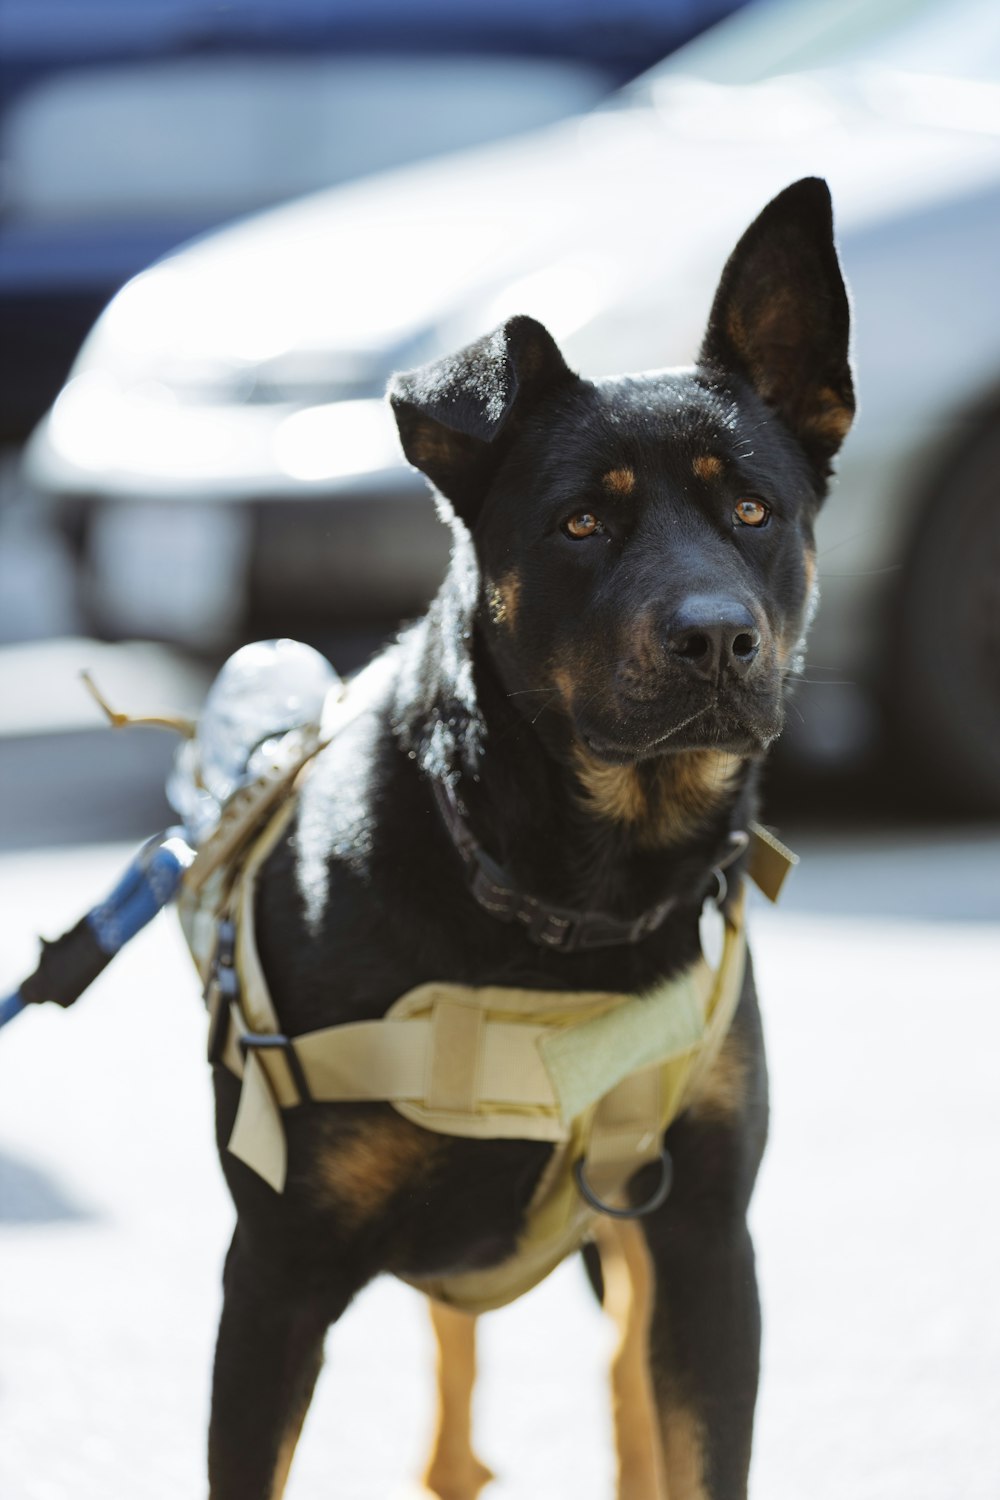 a black and brown dog wearing a harness